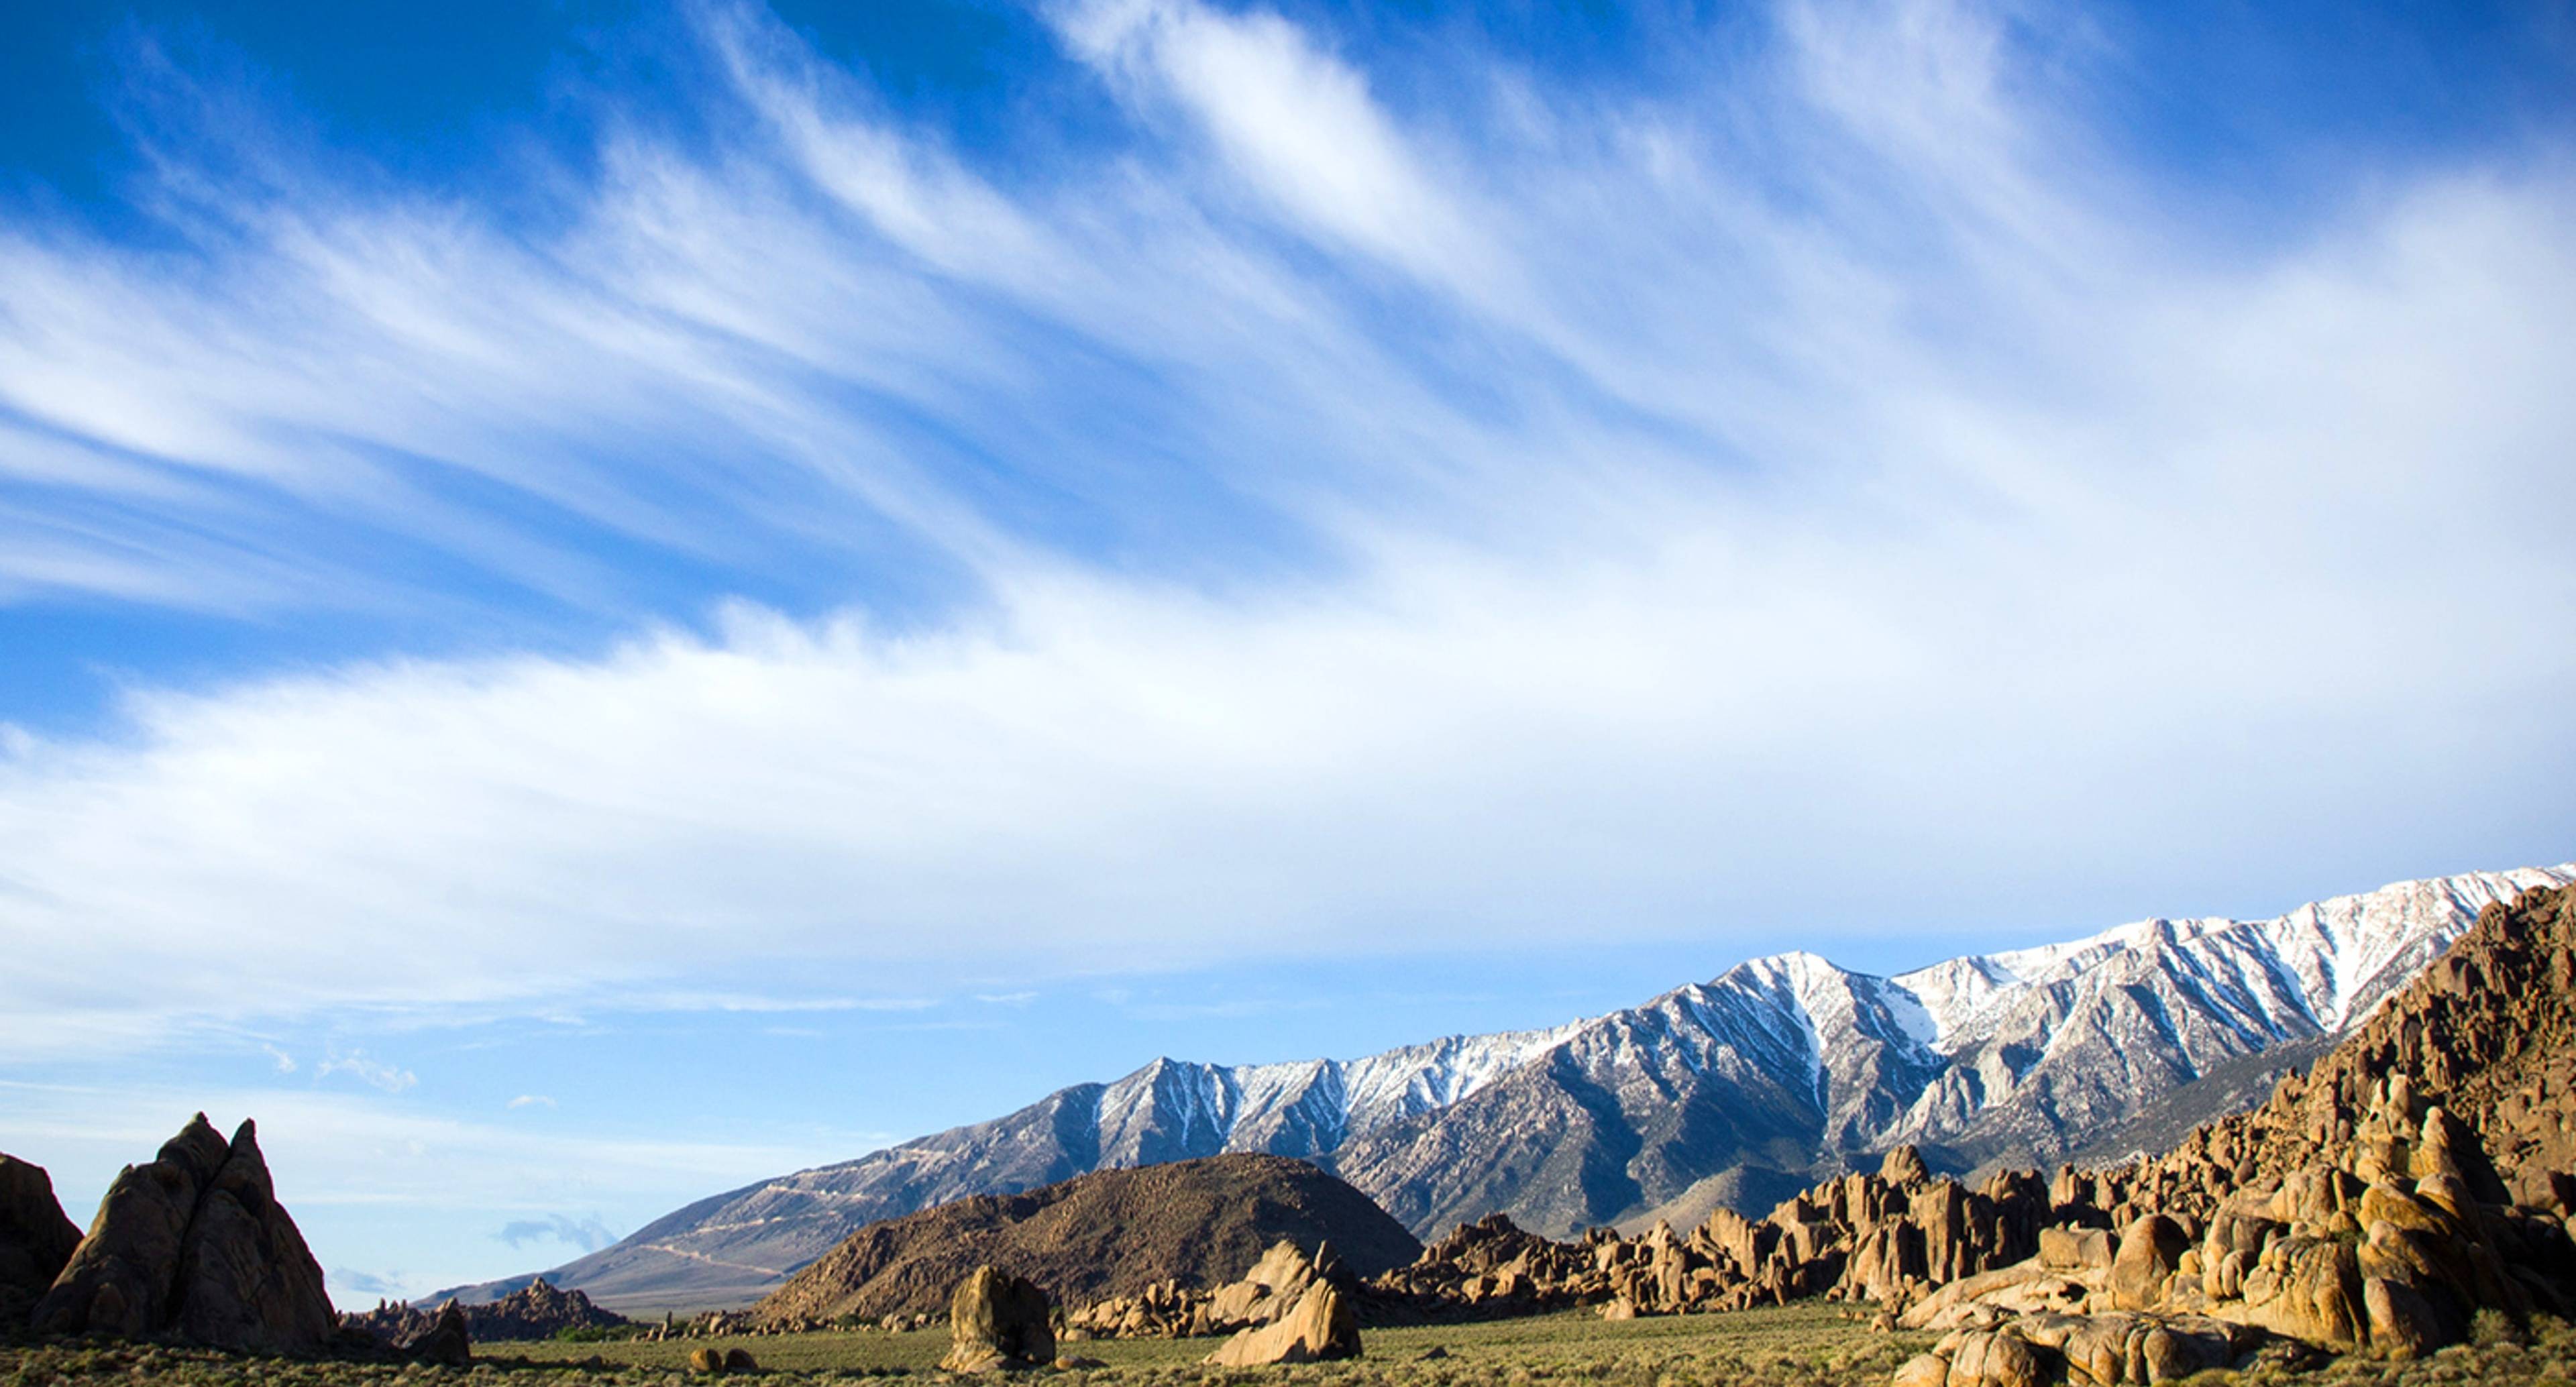 Exploring Landscapes, Legends, and Loss in the Owens Valley